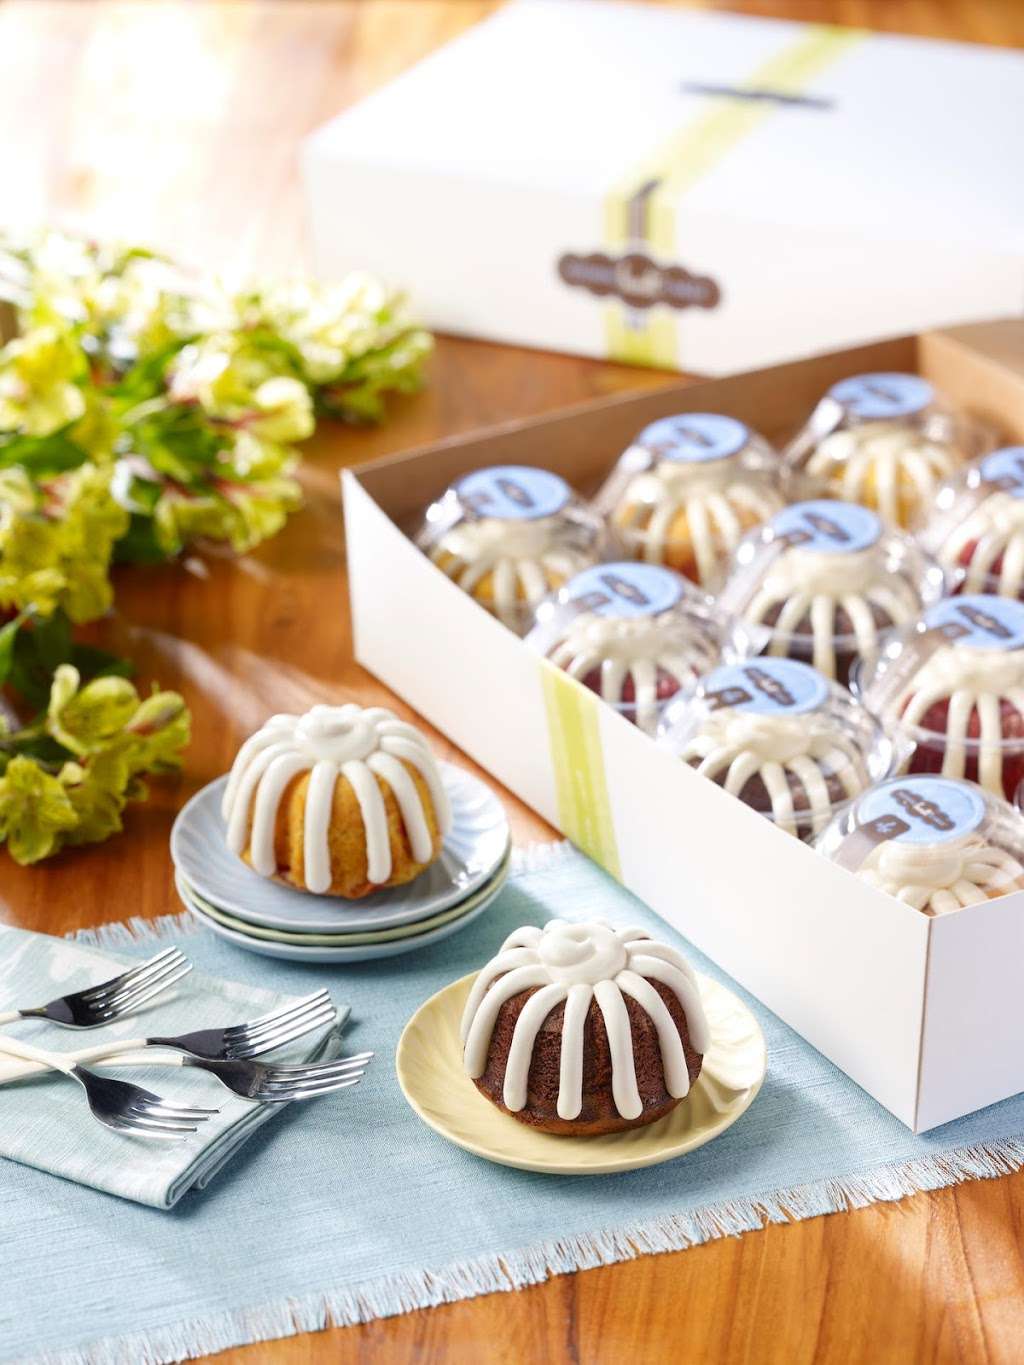 Nothing Bundt Cakes | 9704 Rea Rd Suite A, Waxhaw, NC 28173 | Phone: (704) 845-2253